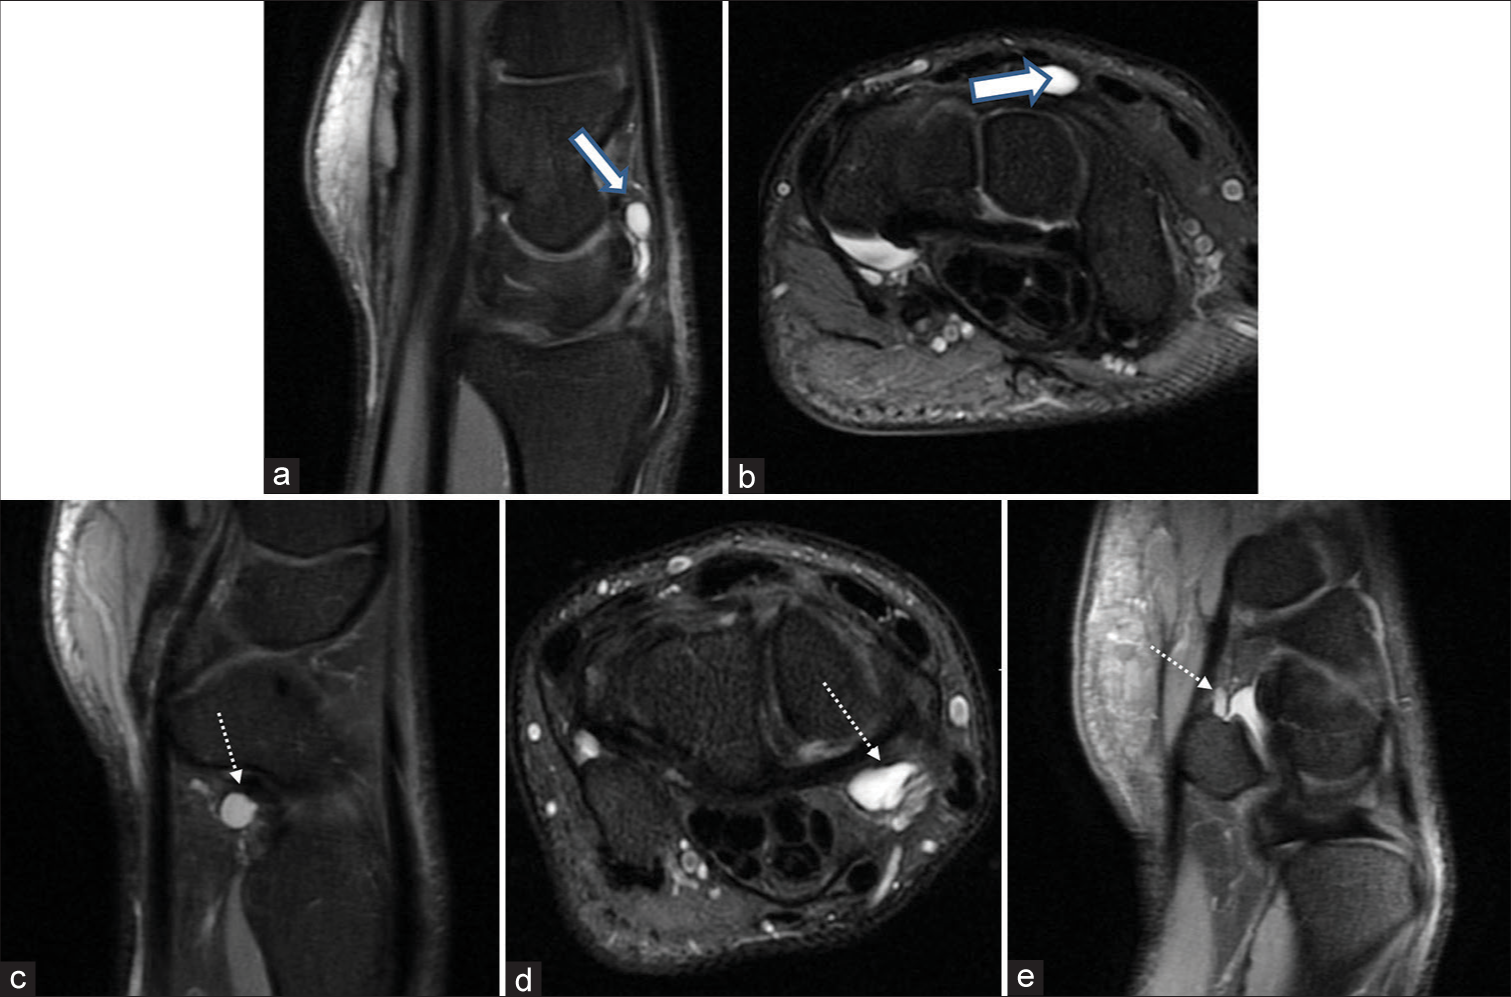 Ganglion cysts in the left wrist of a 31-year-old batsmen. (a and b) Sagittal and axial proton density fat-suppressed (PDFS) images reveal a multiloculated ganglion cyst on the dorsal aspect of the luno-capitate articulation along the dorsal scapholunate ligament (thick white arrow). (c and d) A ganglion cyst is seen along the volar radioscapholunate ligament (dotted white arrow). (e) Sagittal PDFS images reveal a ganglion cyst at the piso-triquetral articulation (dotted white arrow).